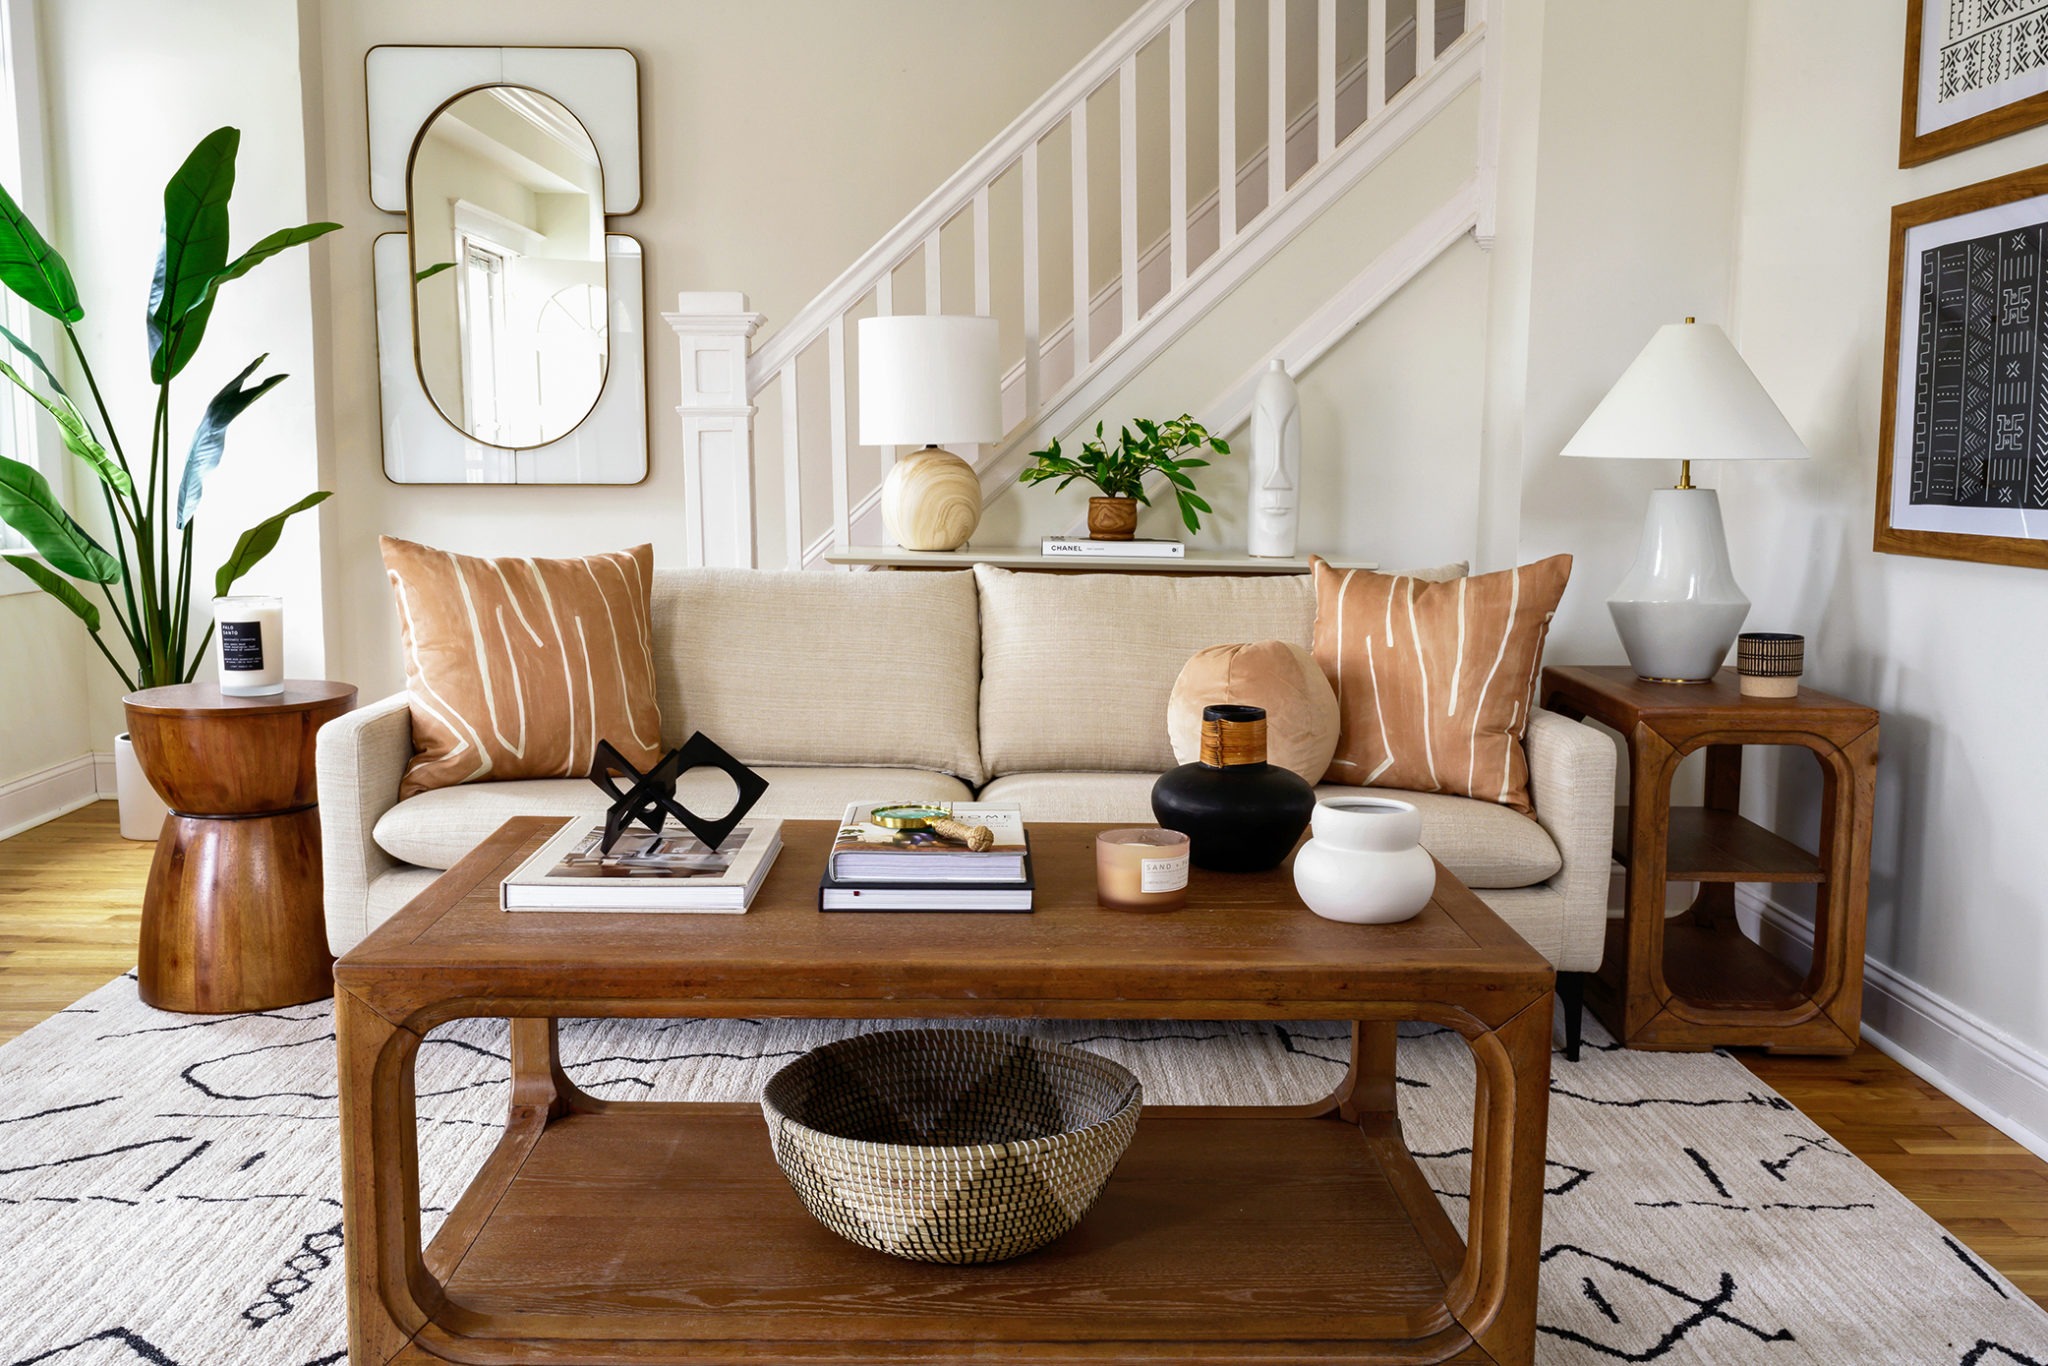 The Benefits of Following a Neutral Color Palette